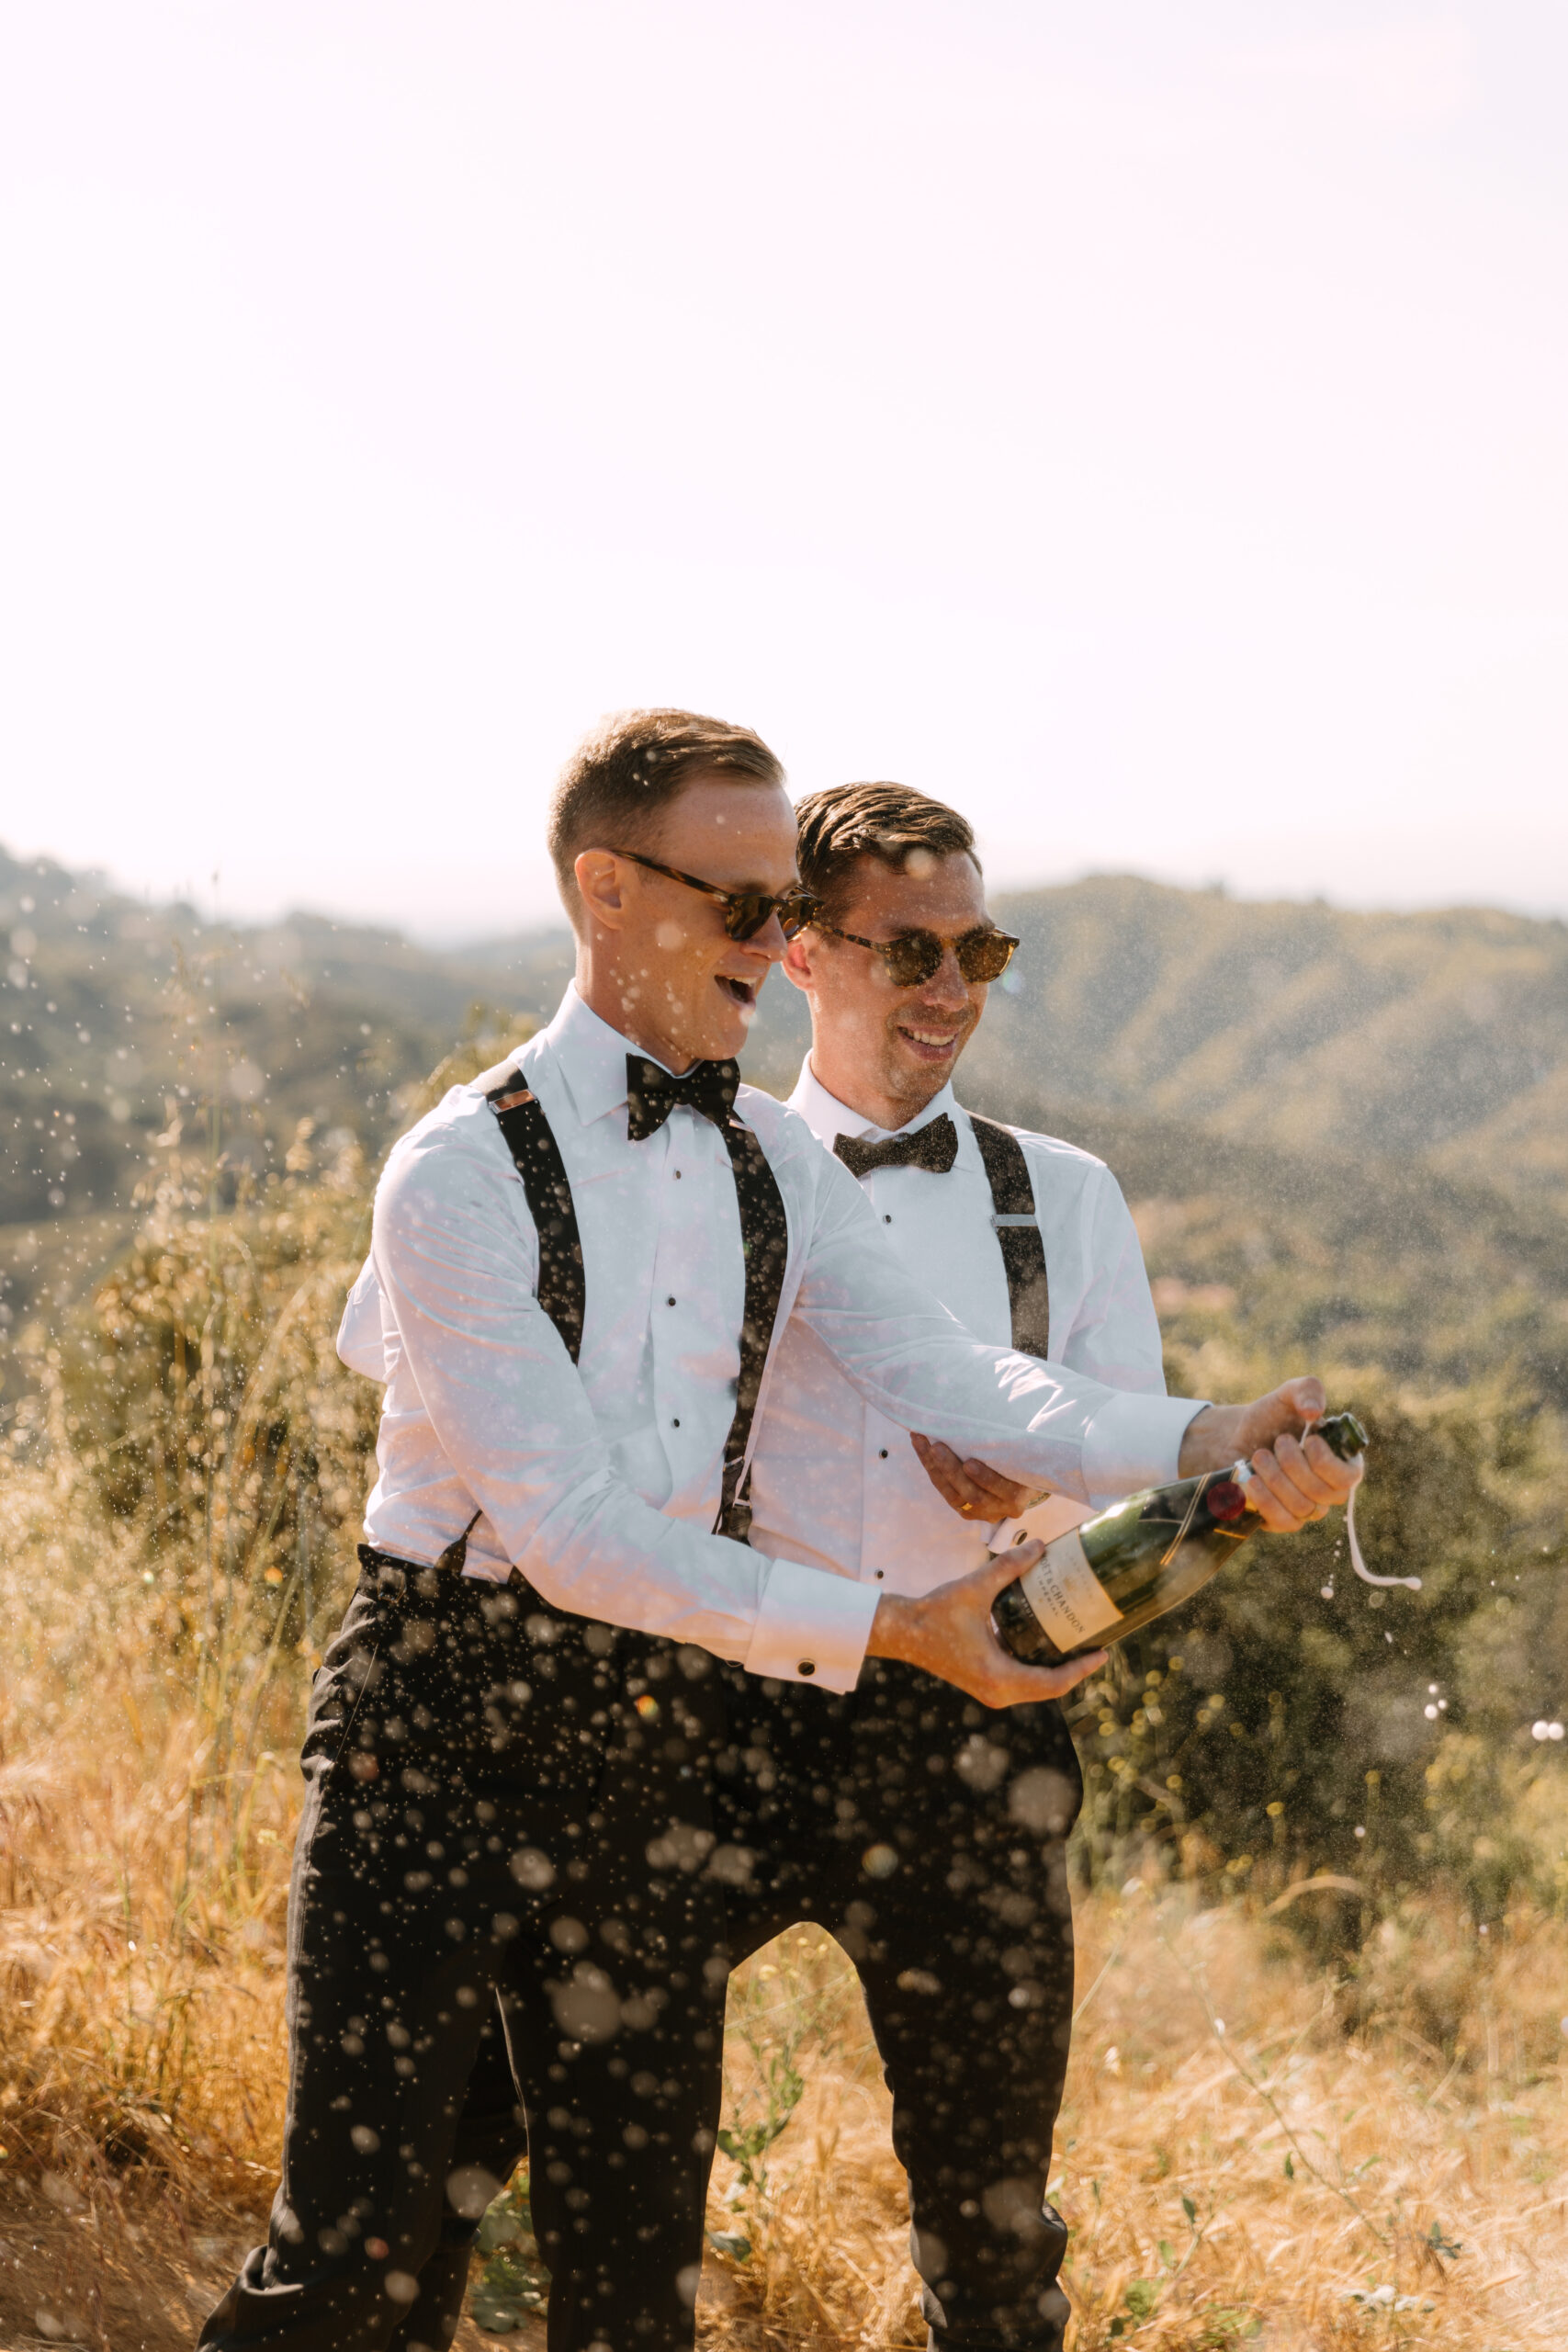 gay couple in suspenders and sunglasses pops foaming champagne bottle overlooking Mulholland Drive